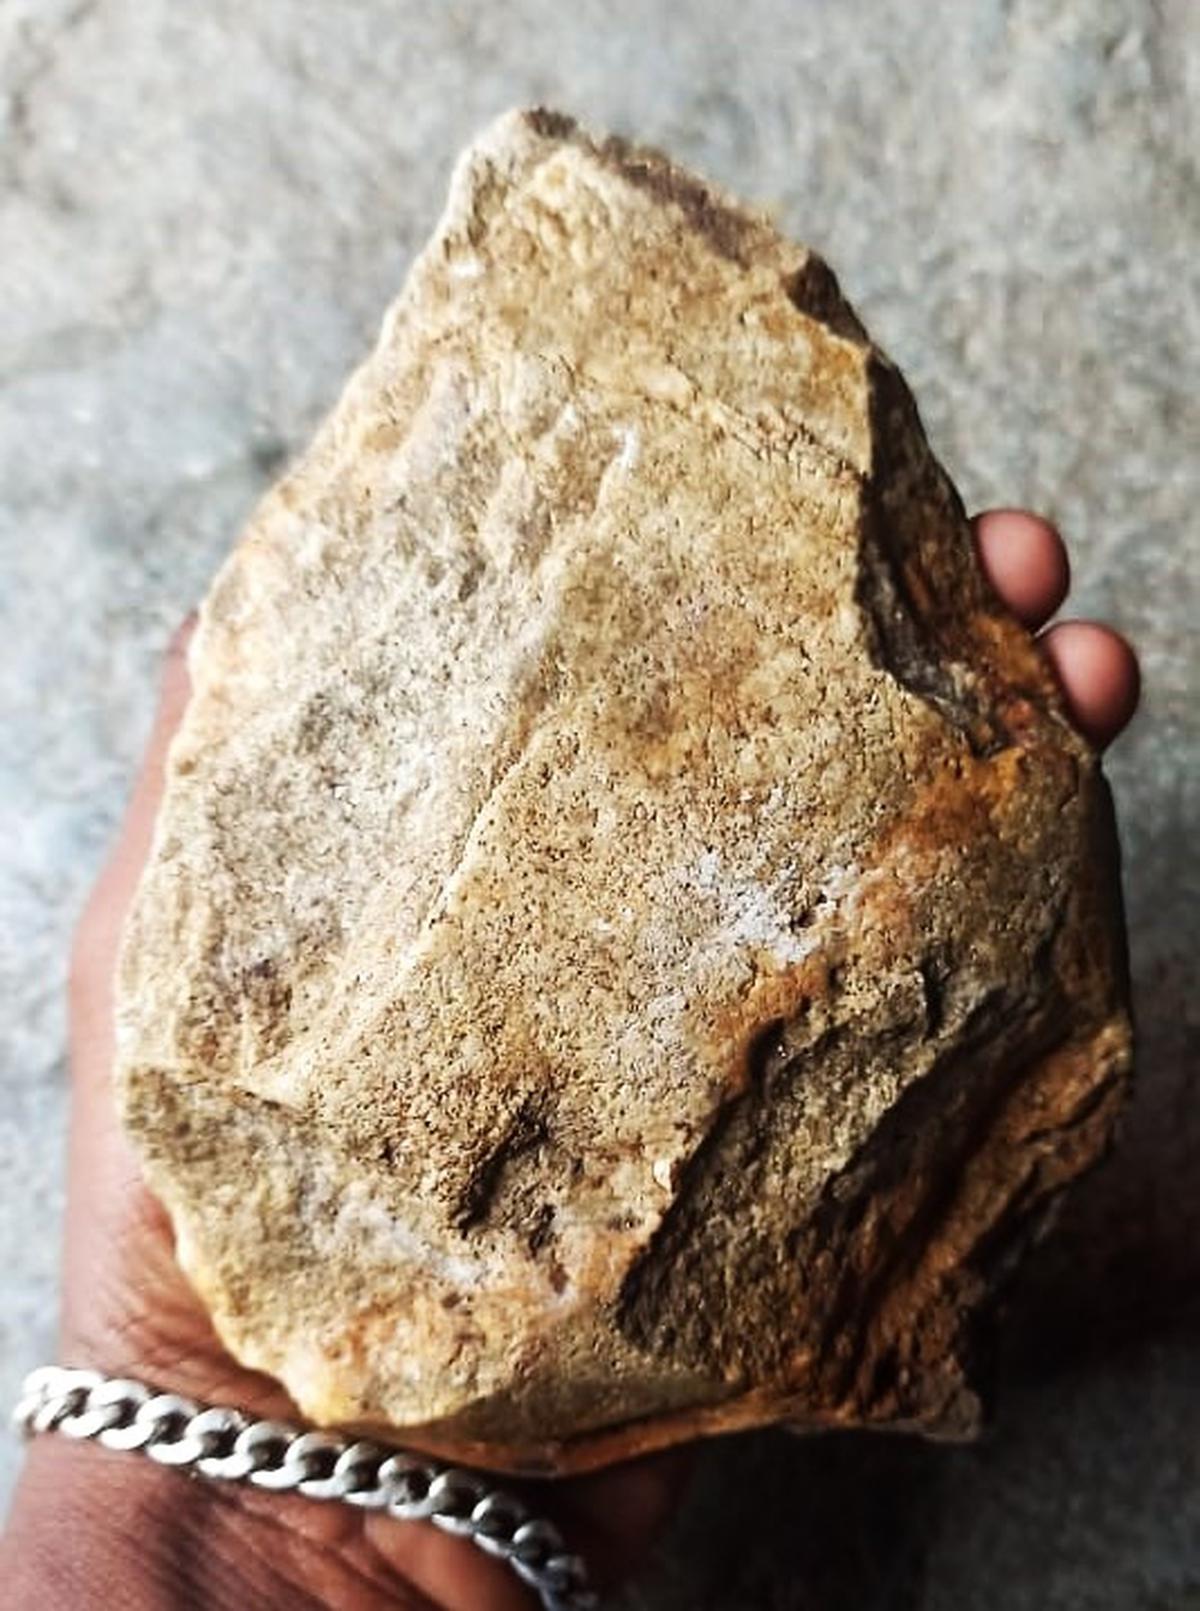 A Palaeolithic tool discovered in Mulugu district in Telangana.